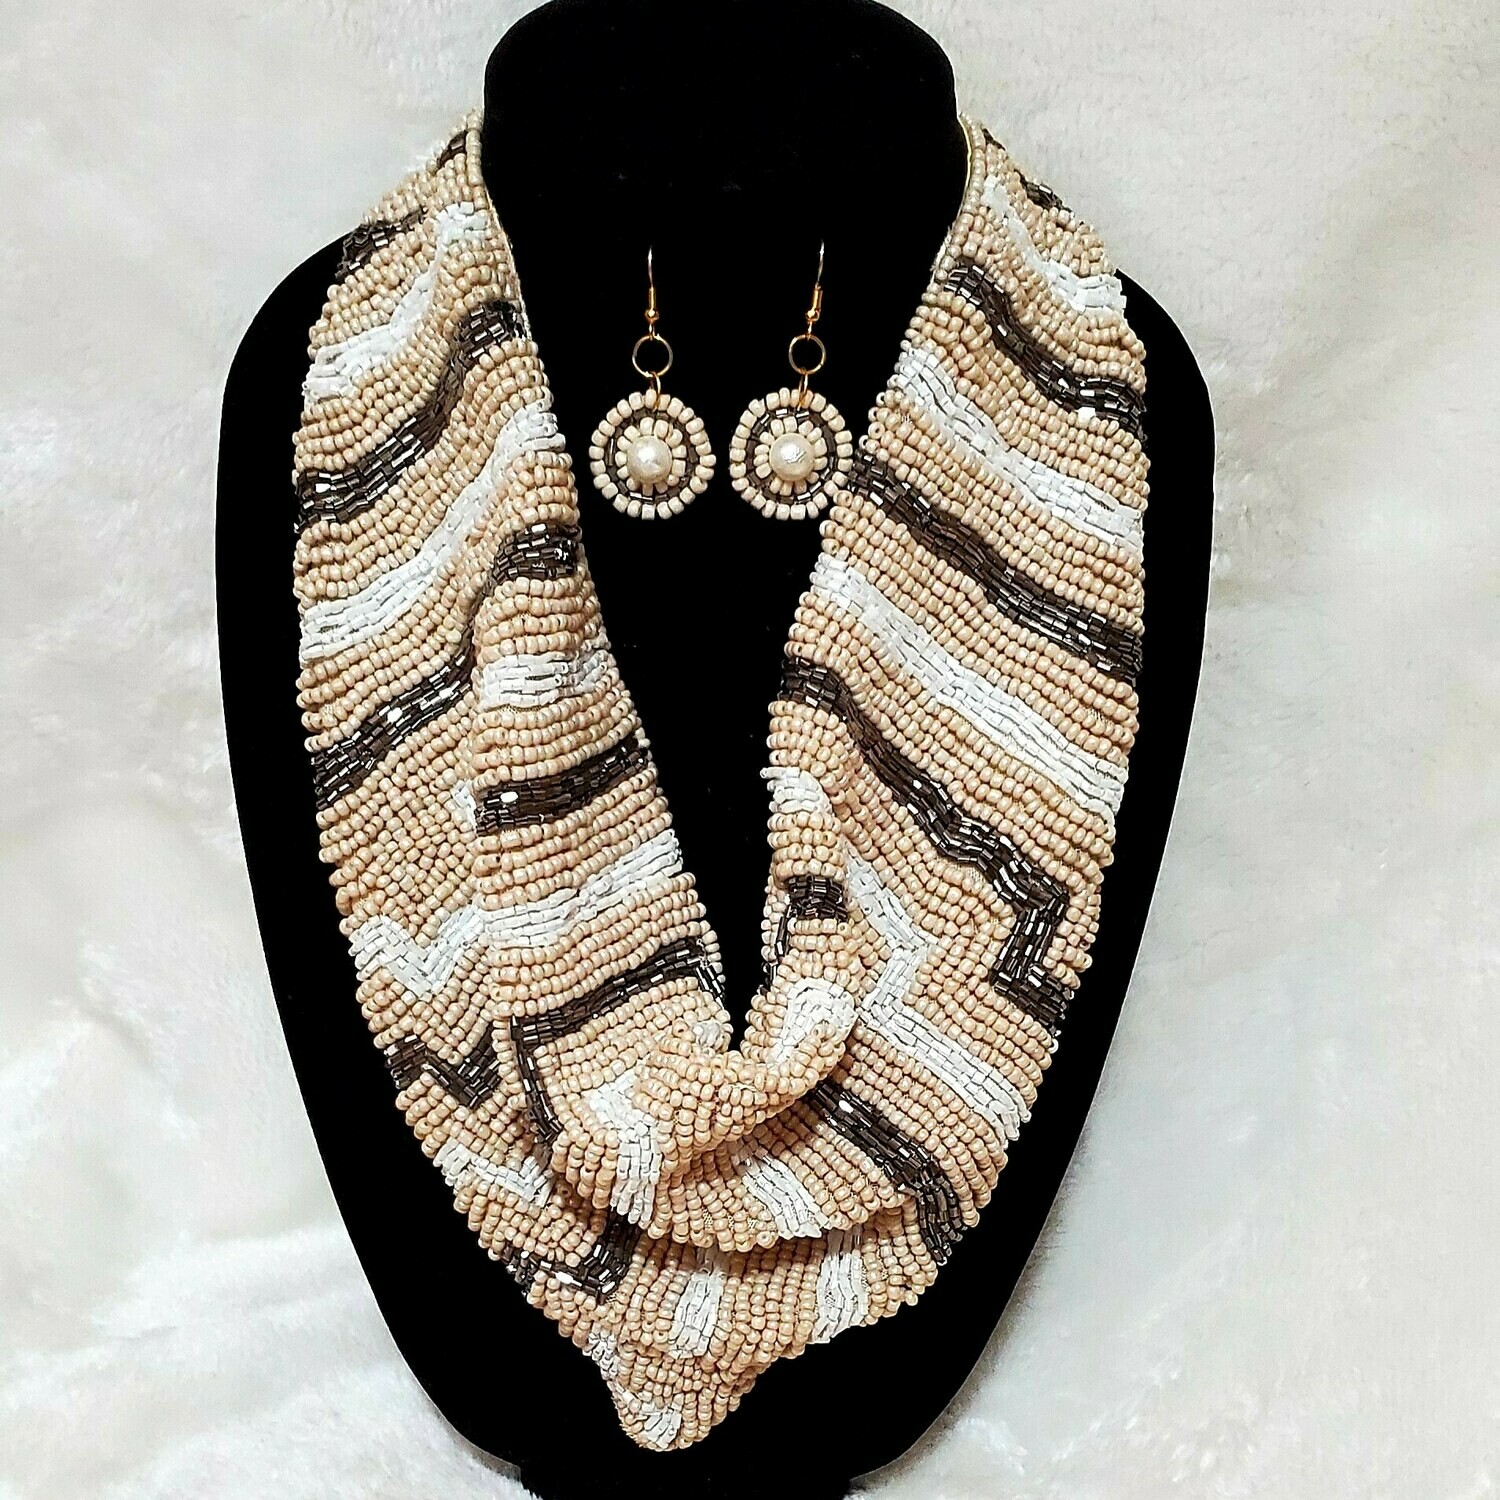 Scarf Tie Bead Necklace Set Gold/Ivory